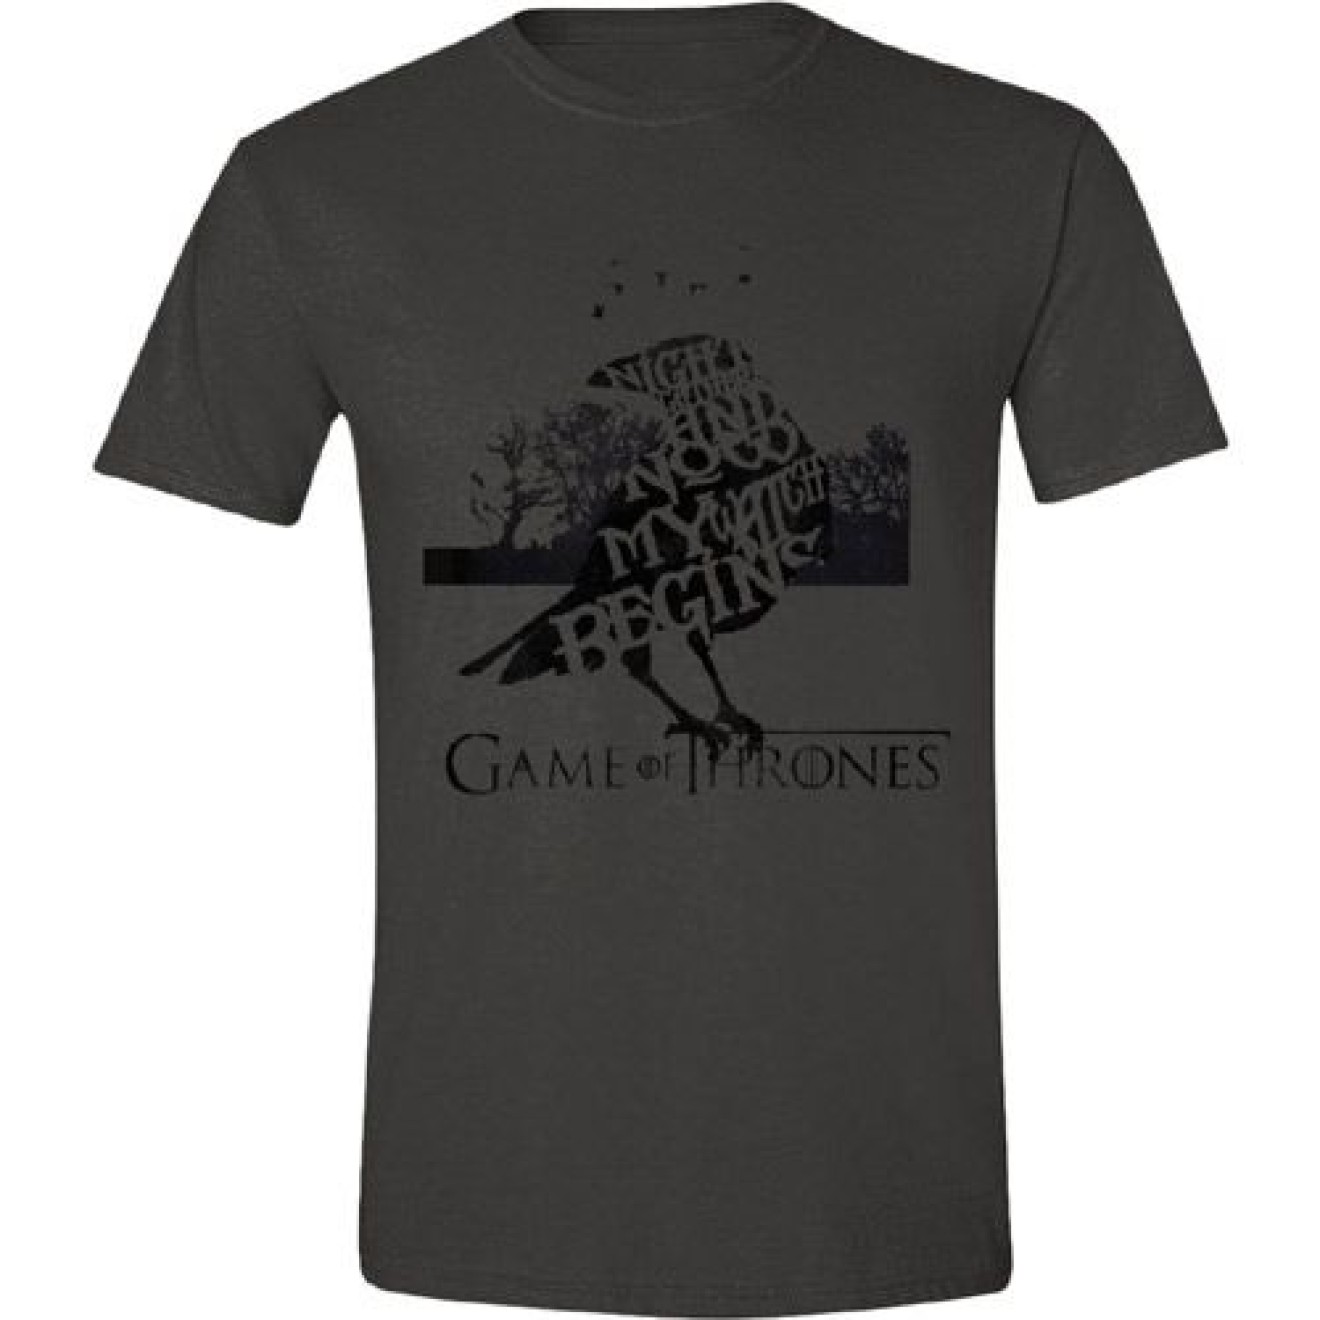 Game of Thrones T-Shirt Night Gathers